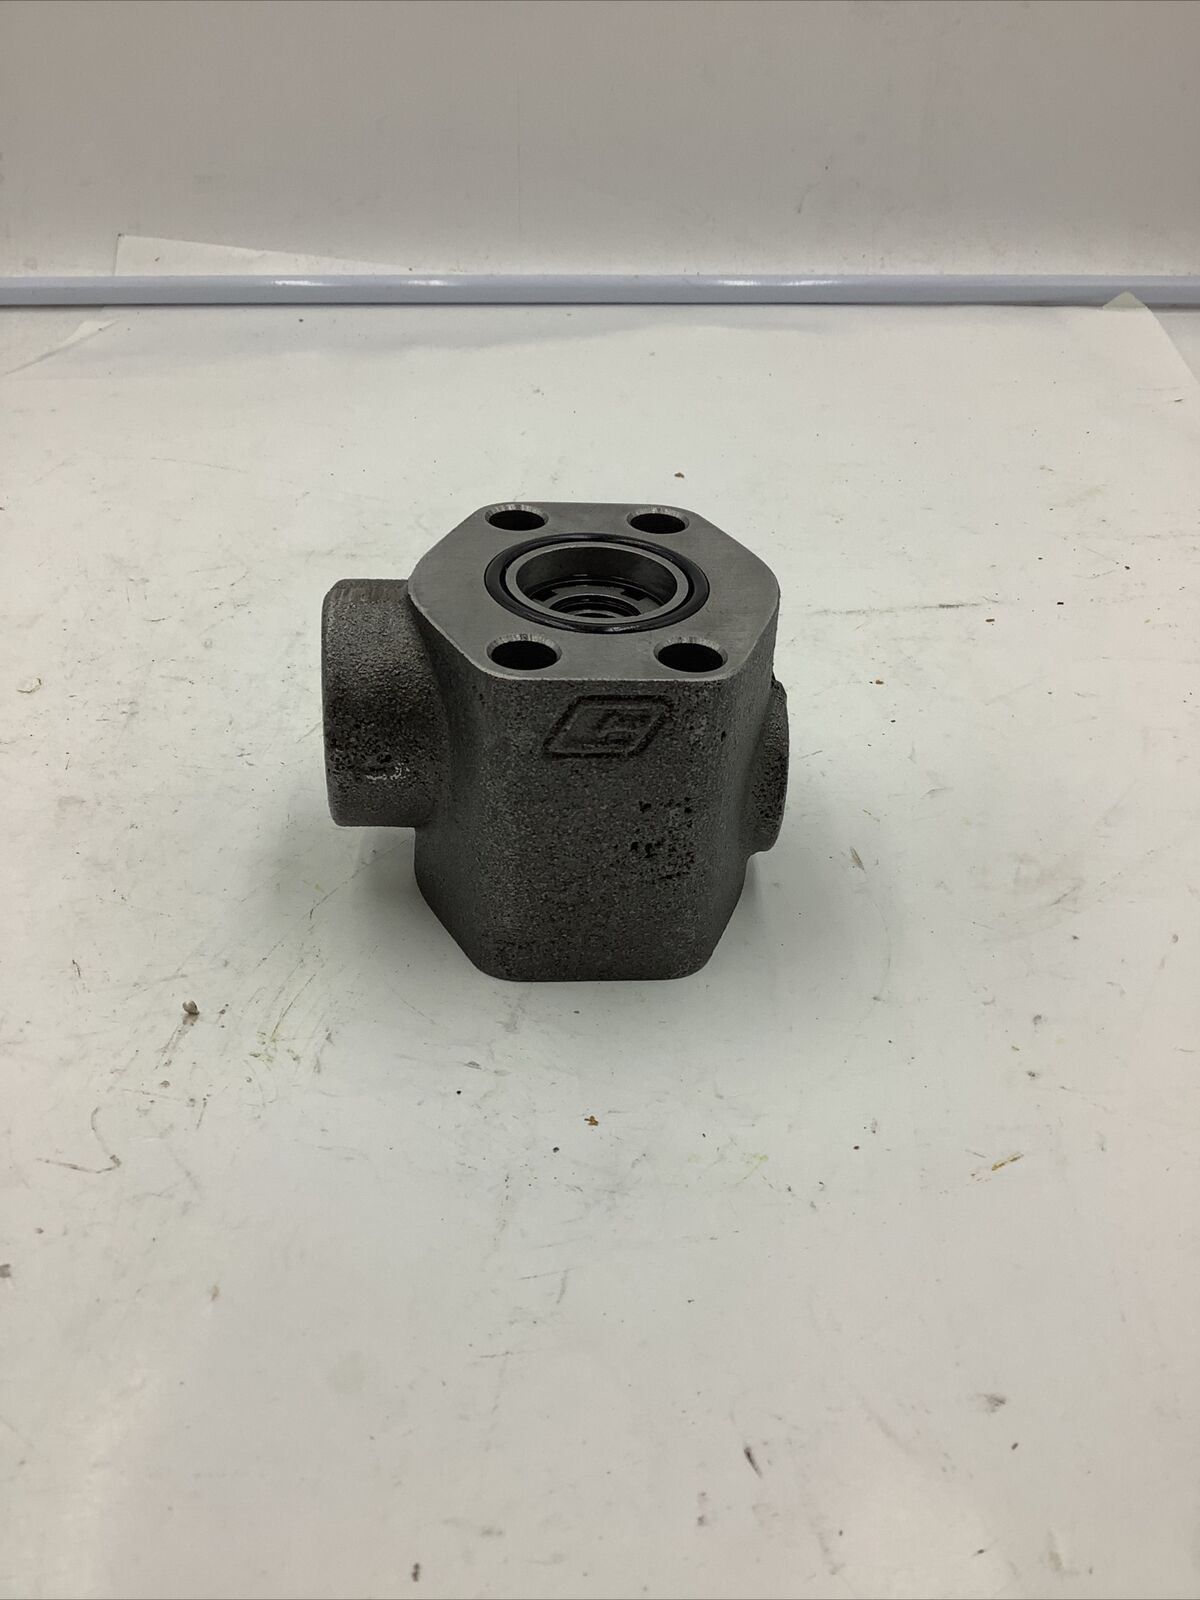 New Parker Commercial Hydraulic Valve 316-9414-015 HANNIFIN 3169414015 PH FLOW